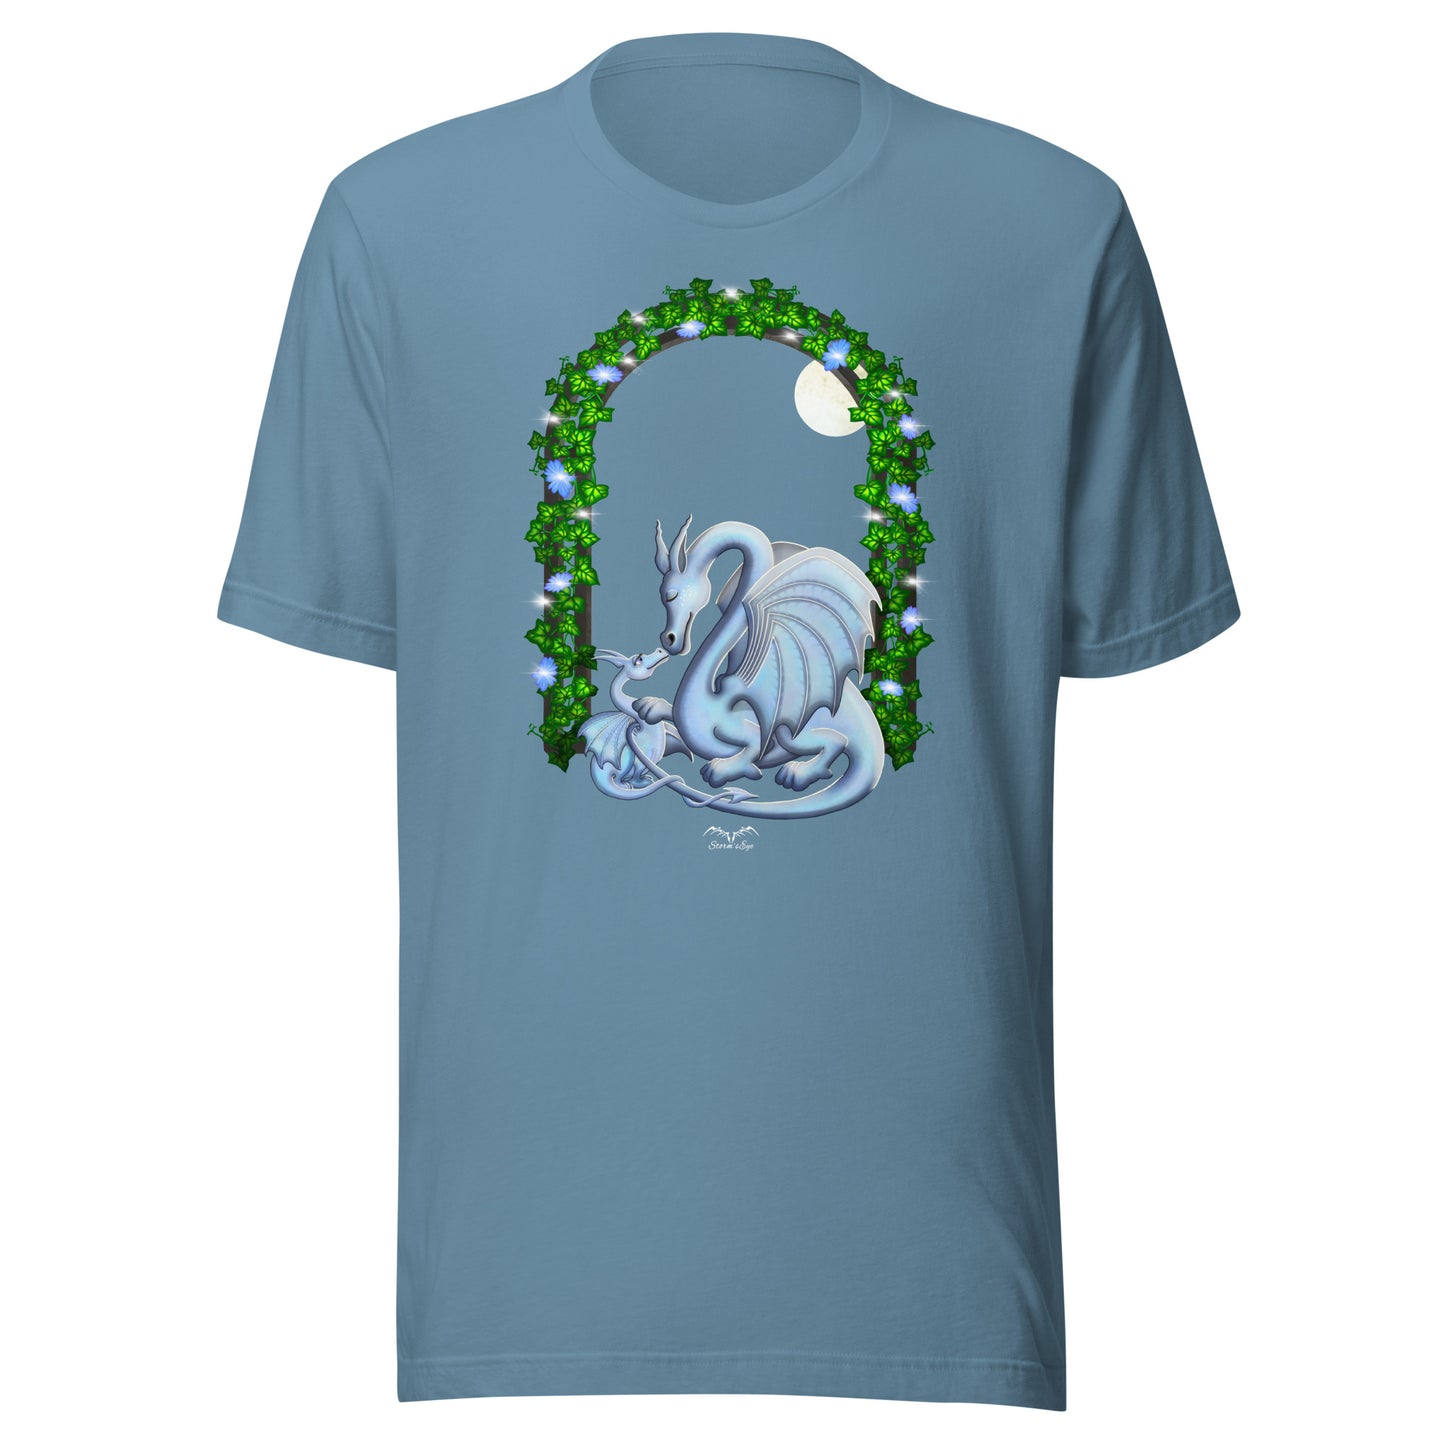 Mum and baby dragon T-shirt, light blue, by Stormseye Design